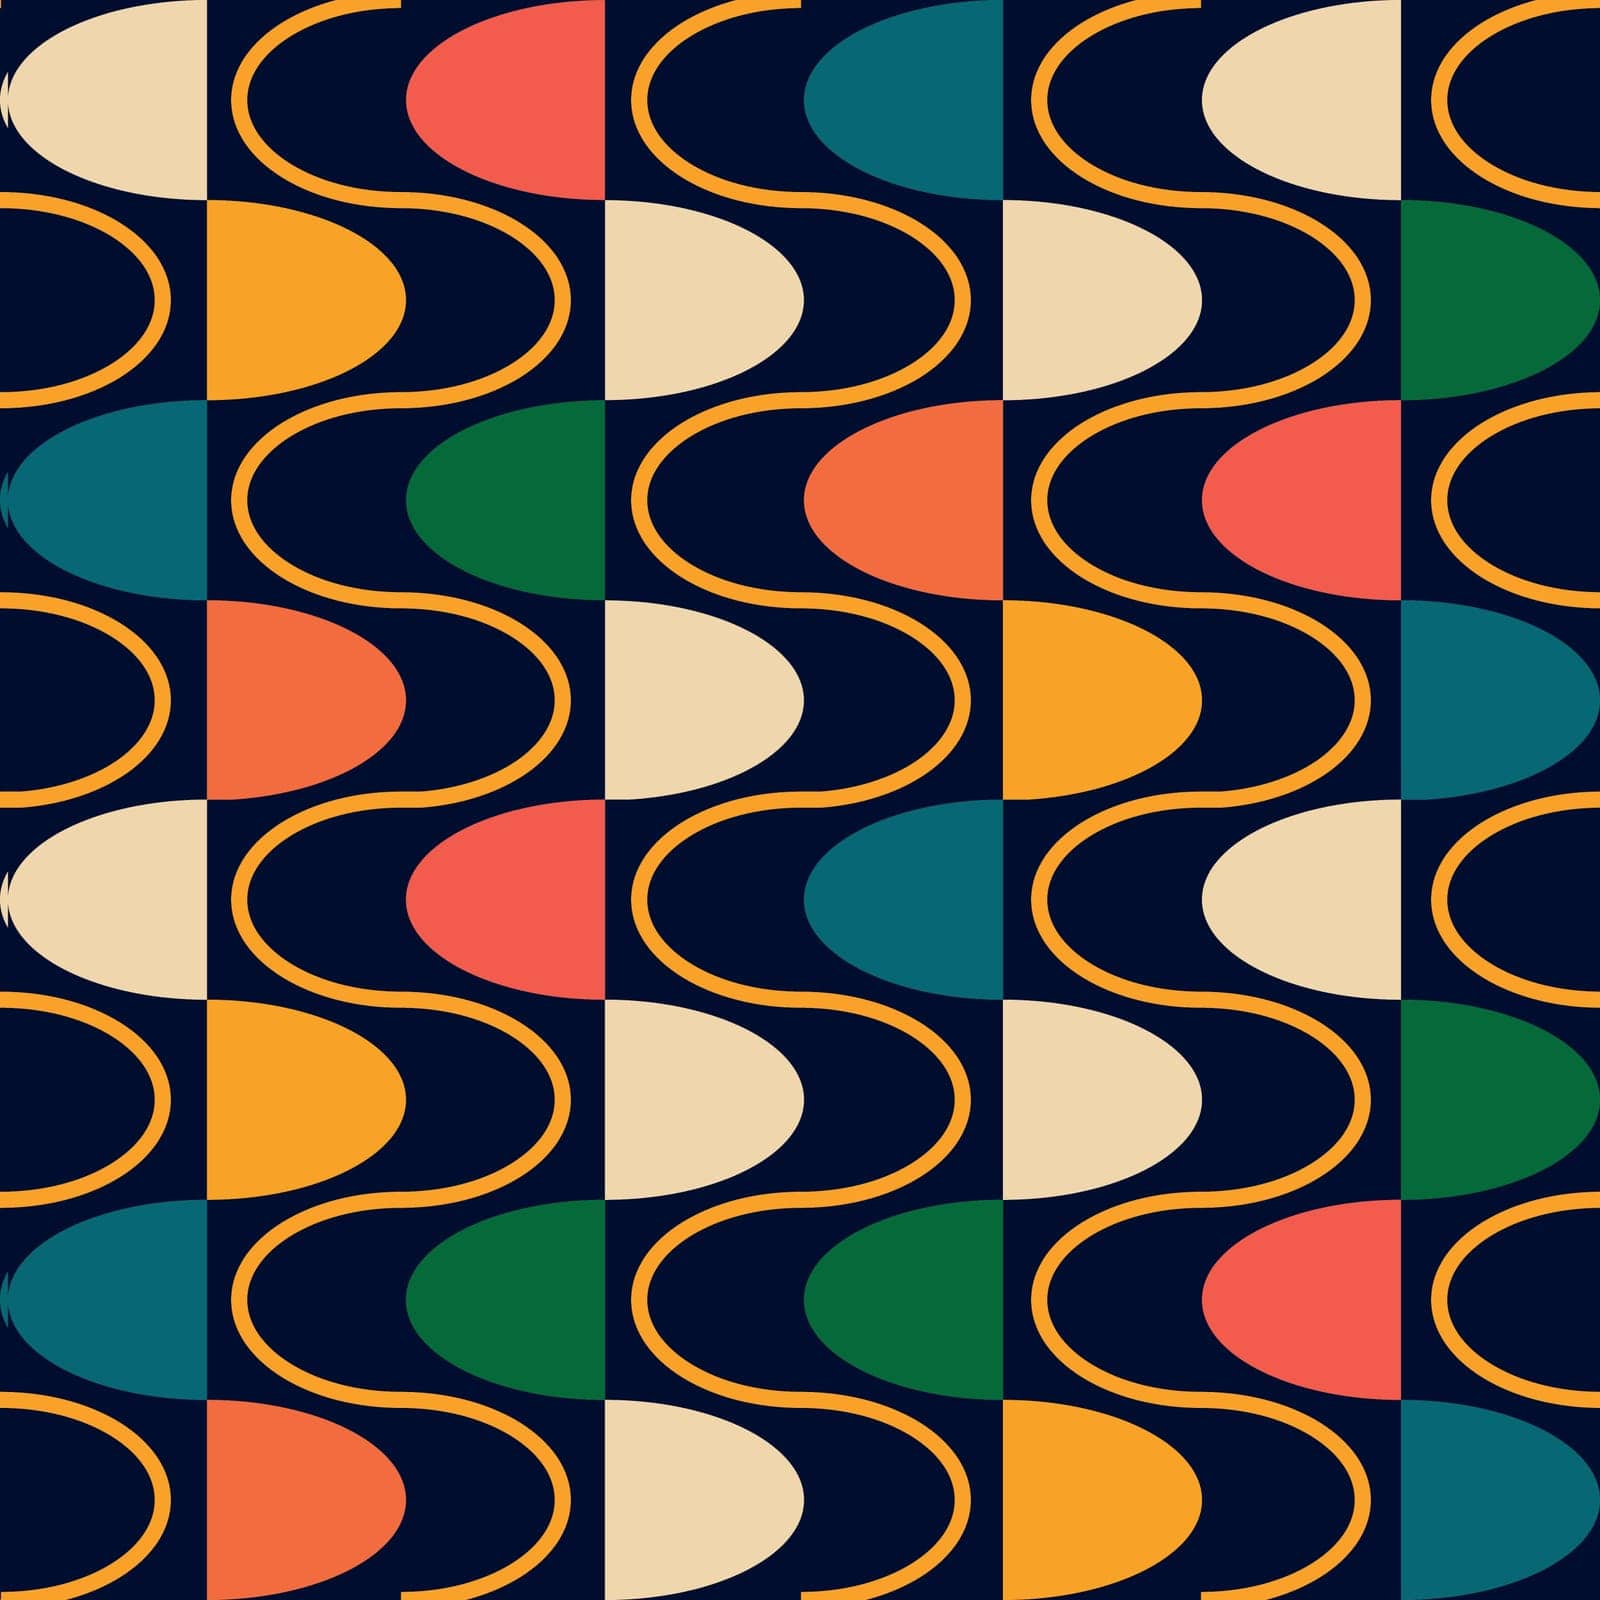 Retro pattern in the style of the 60s. Geometric groovy pattern